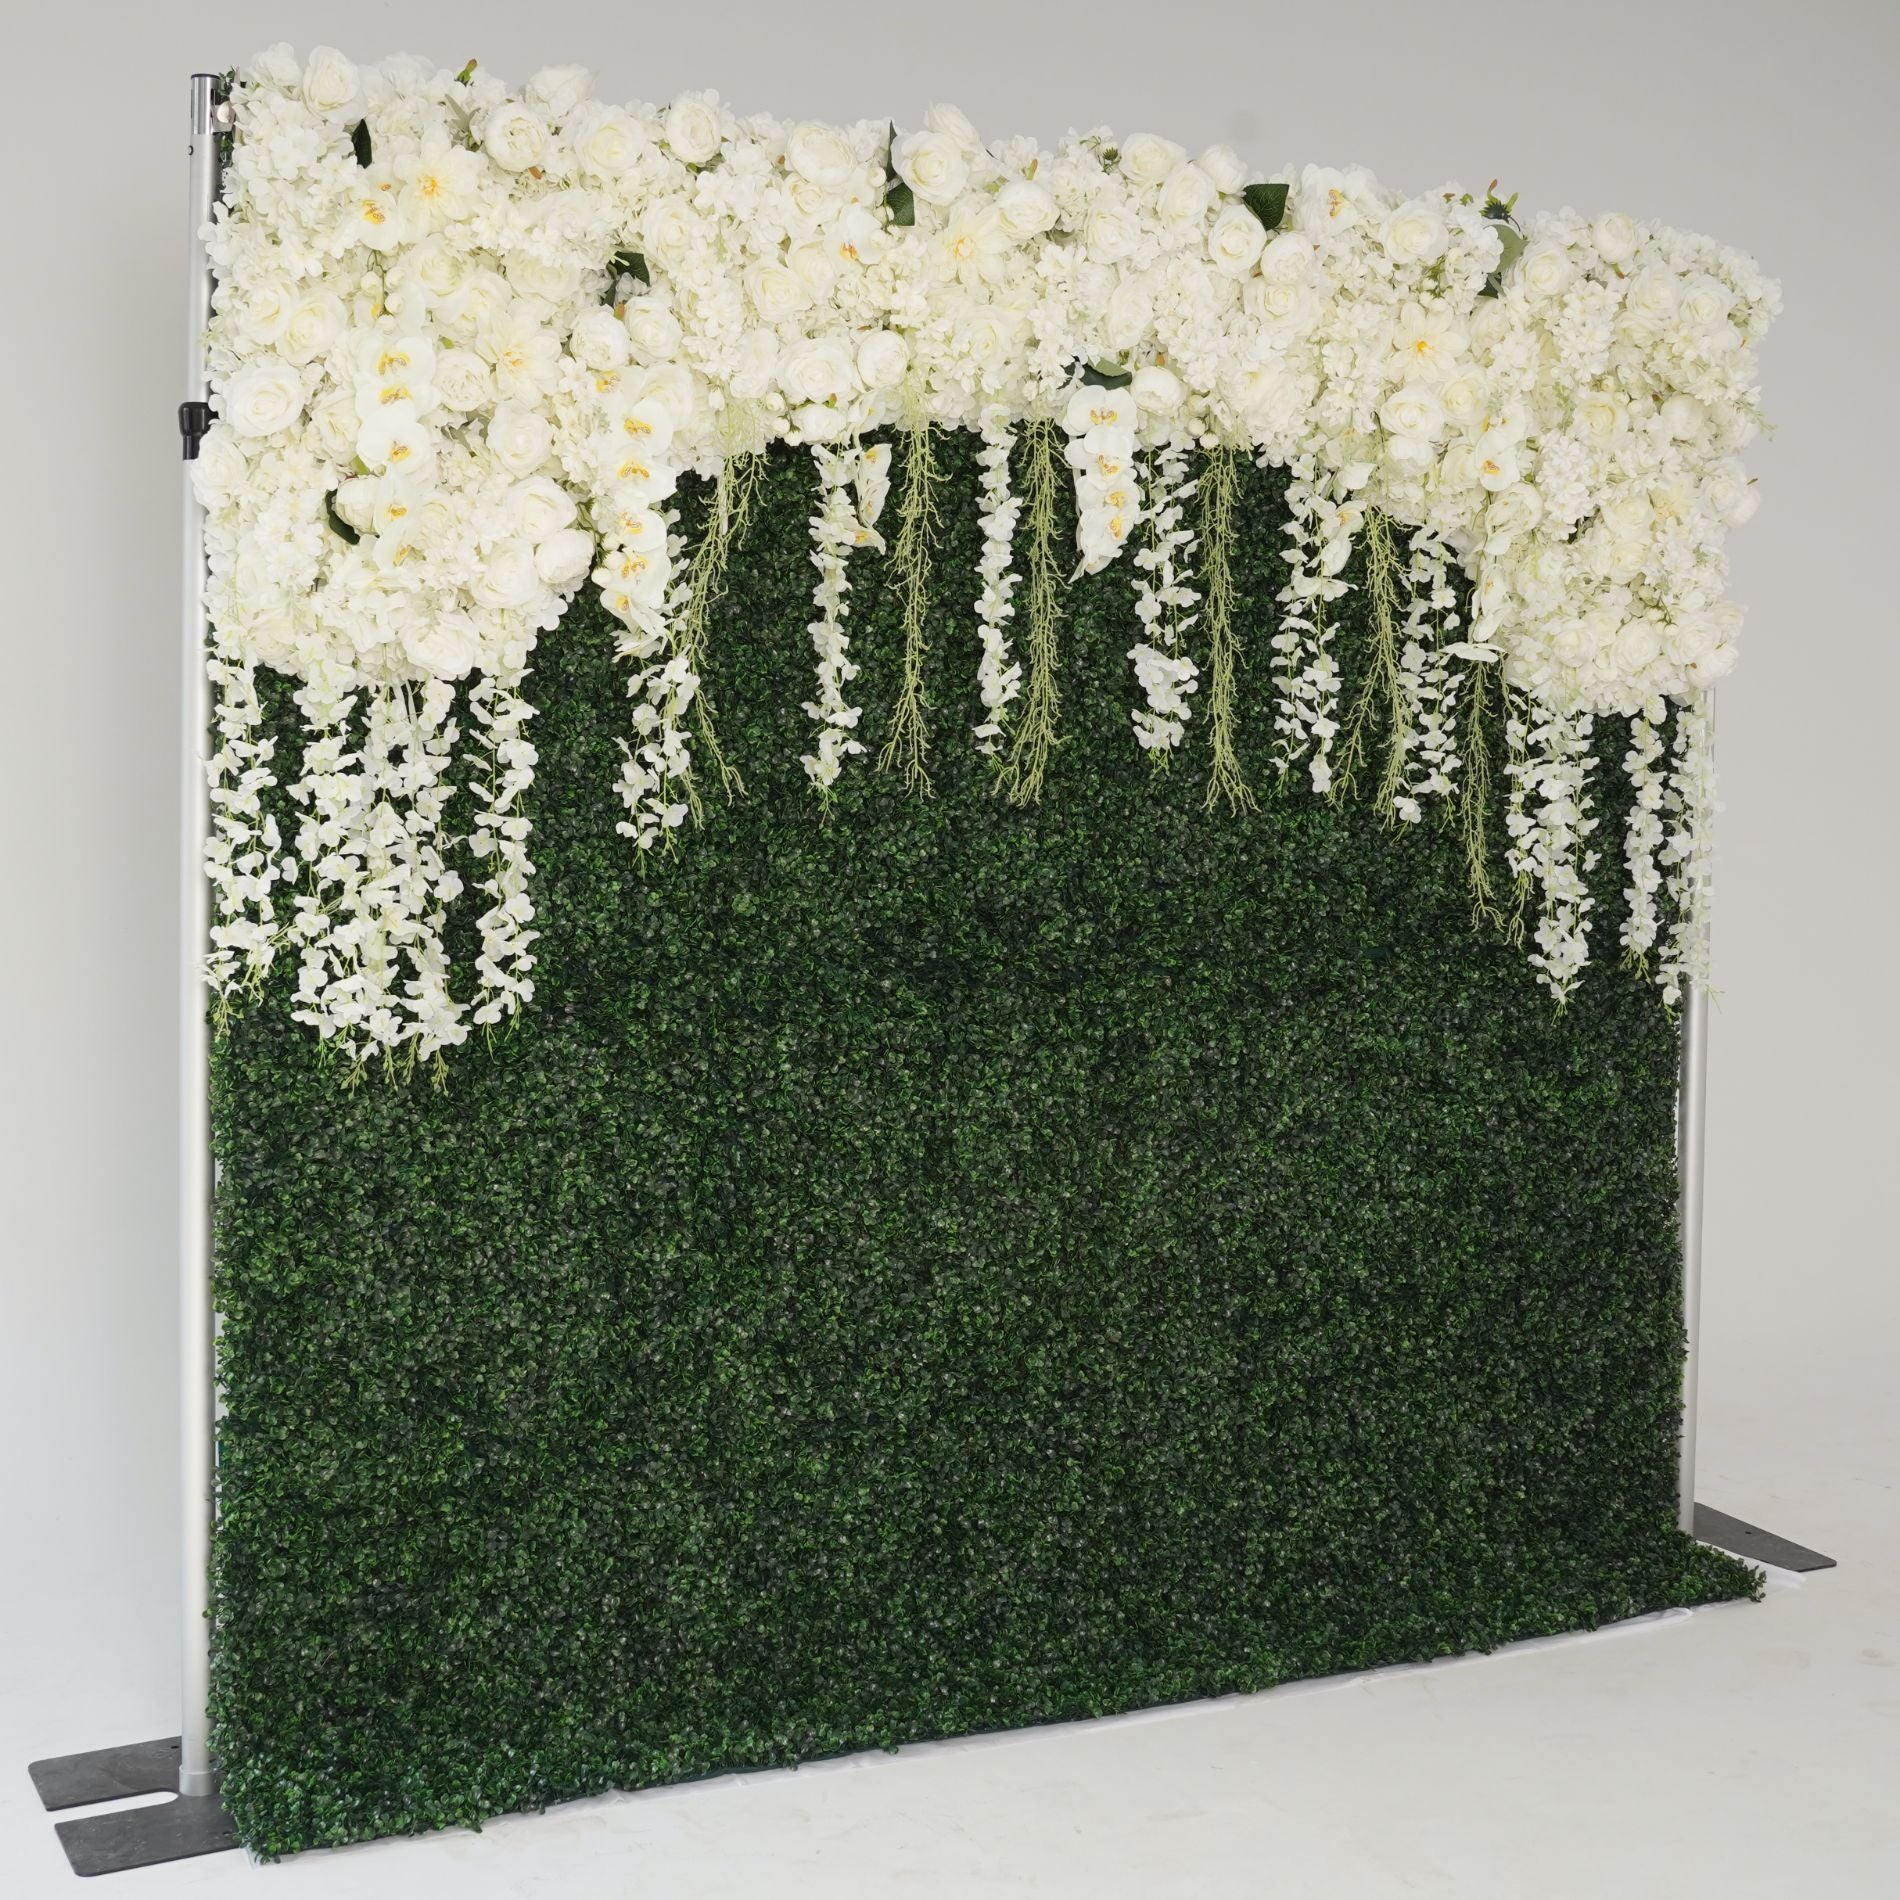 Flower Wall Cream White Florals Cover Wedding Party Proposal Decor